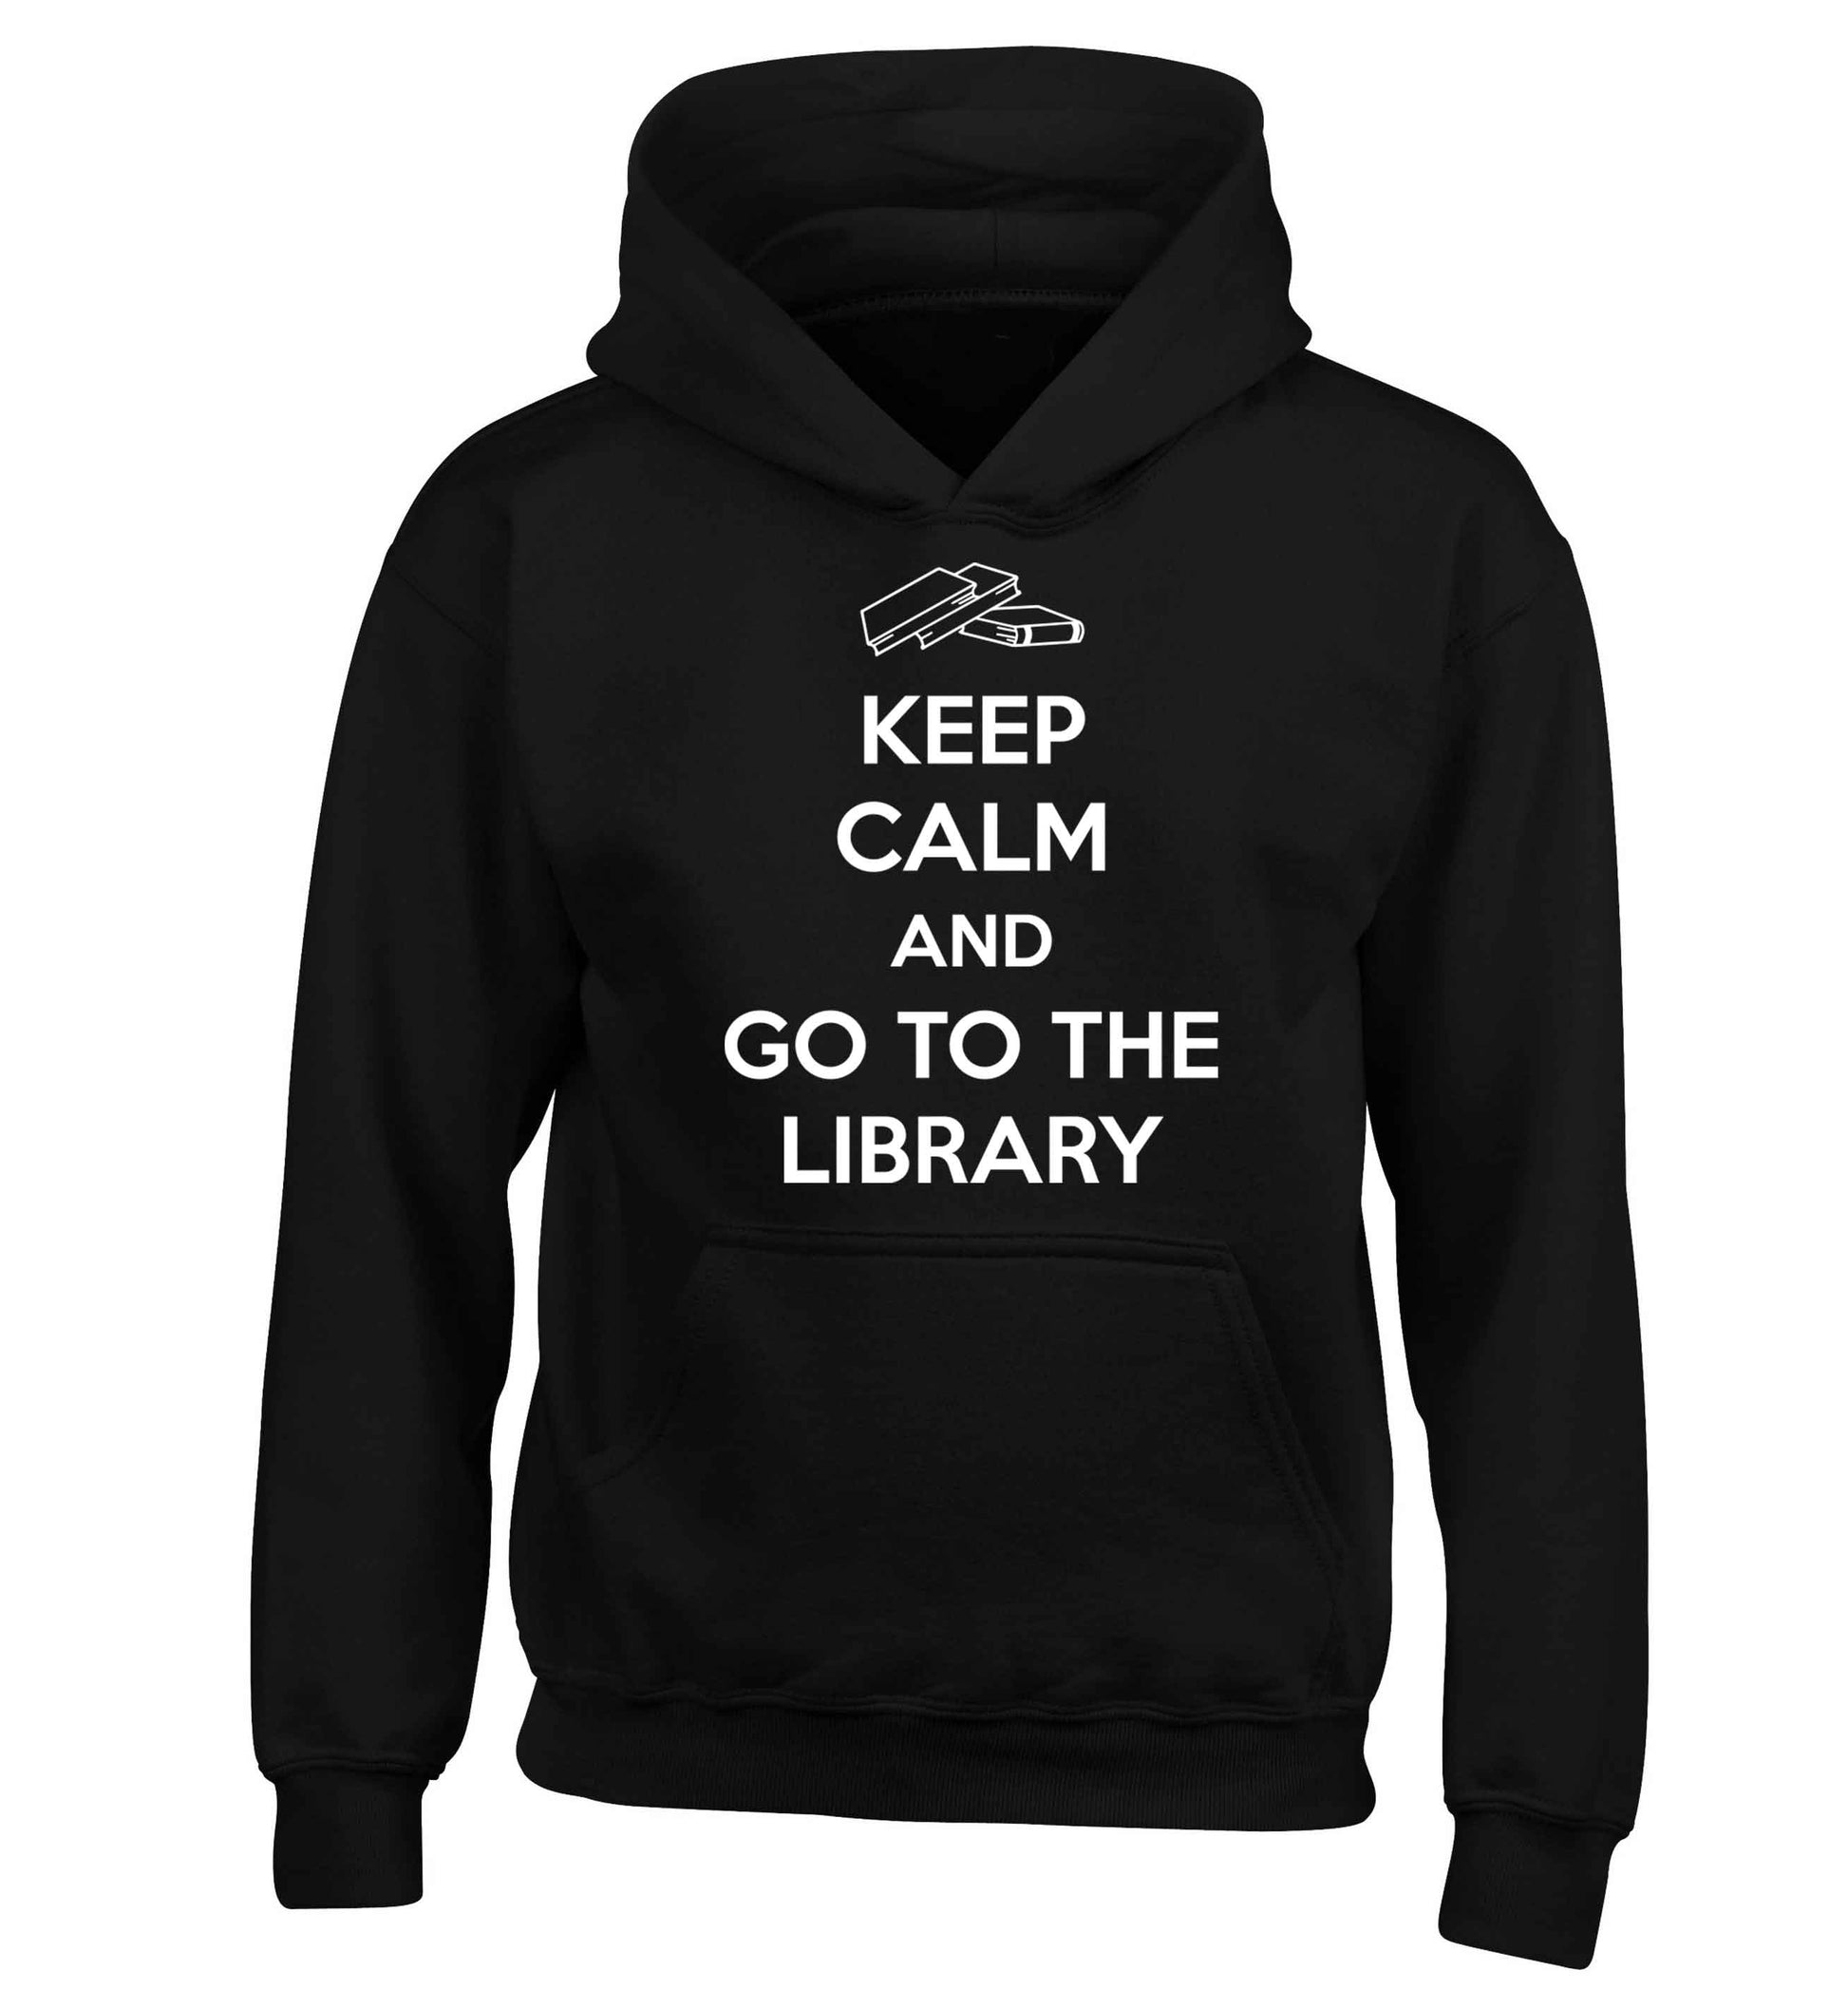 Keep calm and go to the library children's black hoodie 12-13 Years